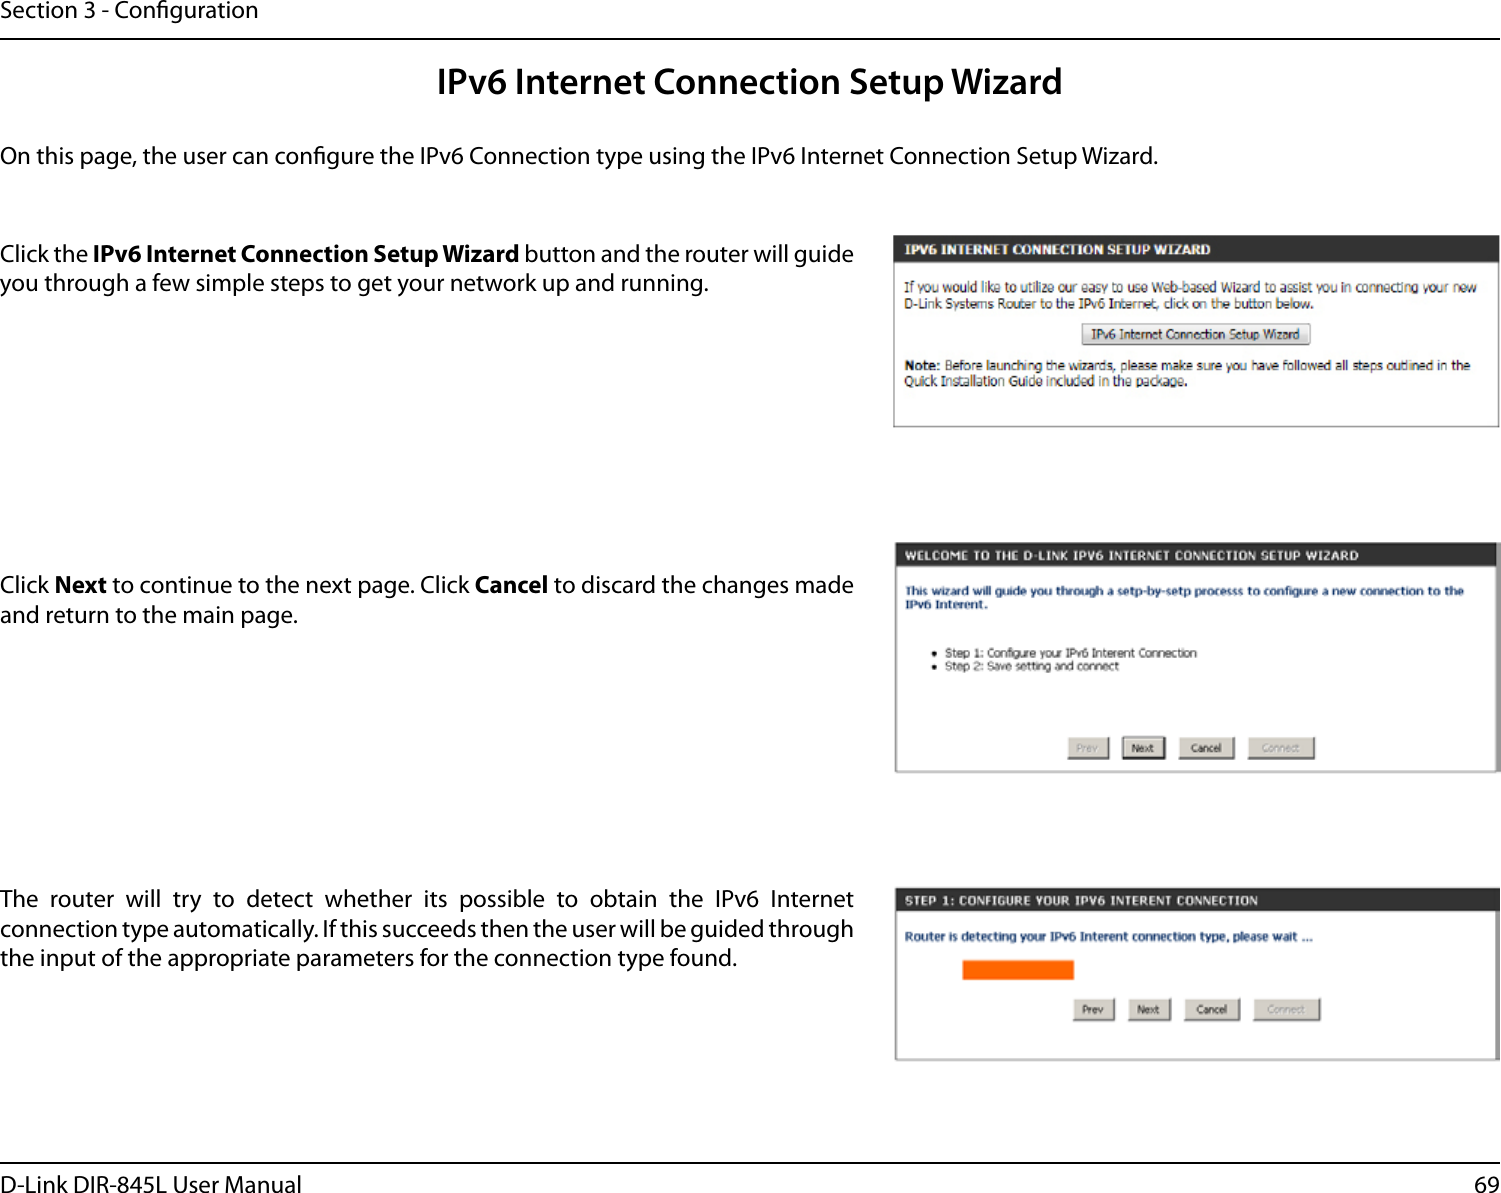 69D-Link DIR-845L User ManualSection 3 - CongurationIPv6 Internet Connection Setup WizardOn this page, the user can congure the IPv6 Connection type using the IPv6 Internet Connection Setup Wizard.Click the IPv6 Internet Connection Setup Wizard button and the router will guide you through a few simple steps to get your network up and running.Click Next to continue to the next page. Click Cancel to discard the changes made and return to the main page.The  router  will  try  to  detect  whether  its  possible  to  obtain  the  IPv6  Internet connection type automatically. If this succeeds then the user will be guided through the input of the appropriate parameters for the connection type found.